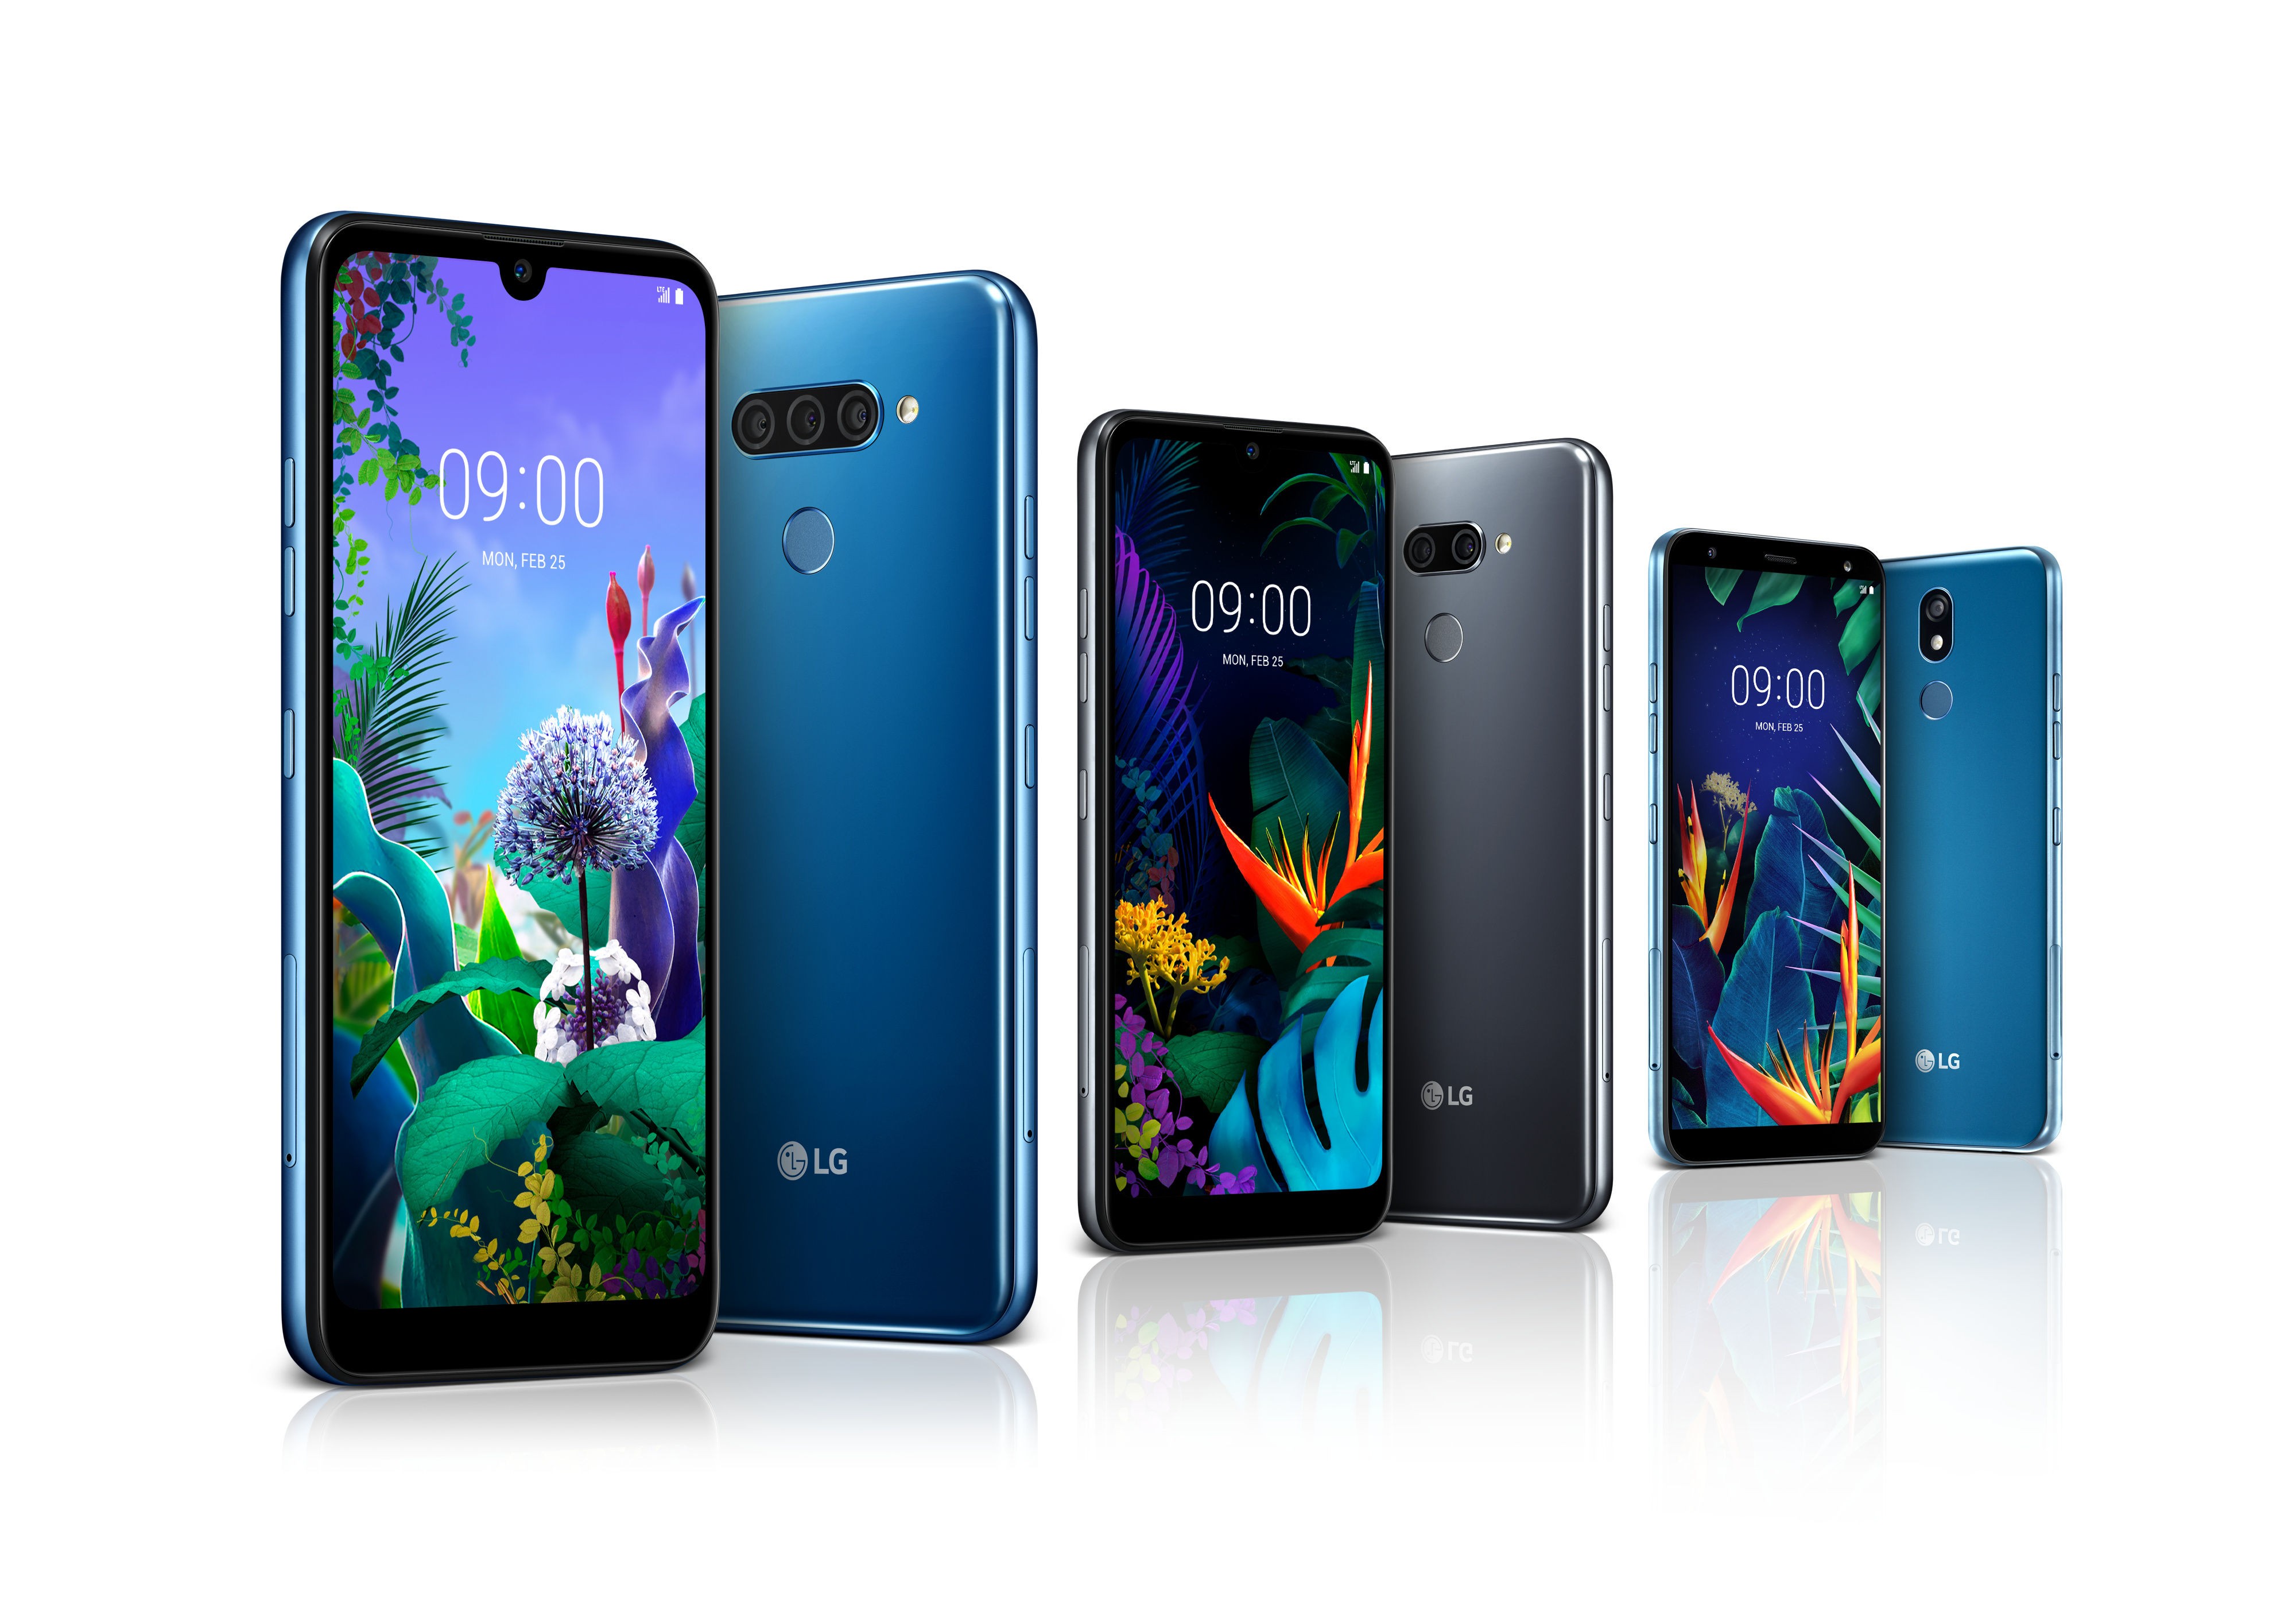 The front and rear view of the LG Q60 in New Moroccan Blue, the LG K50 in New Platinum Gray and LG K40 in New Moroccan Blue